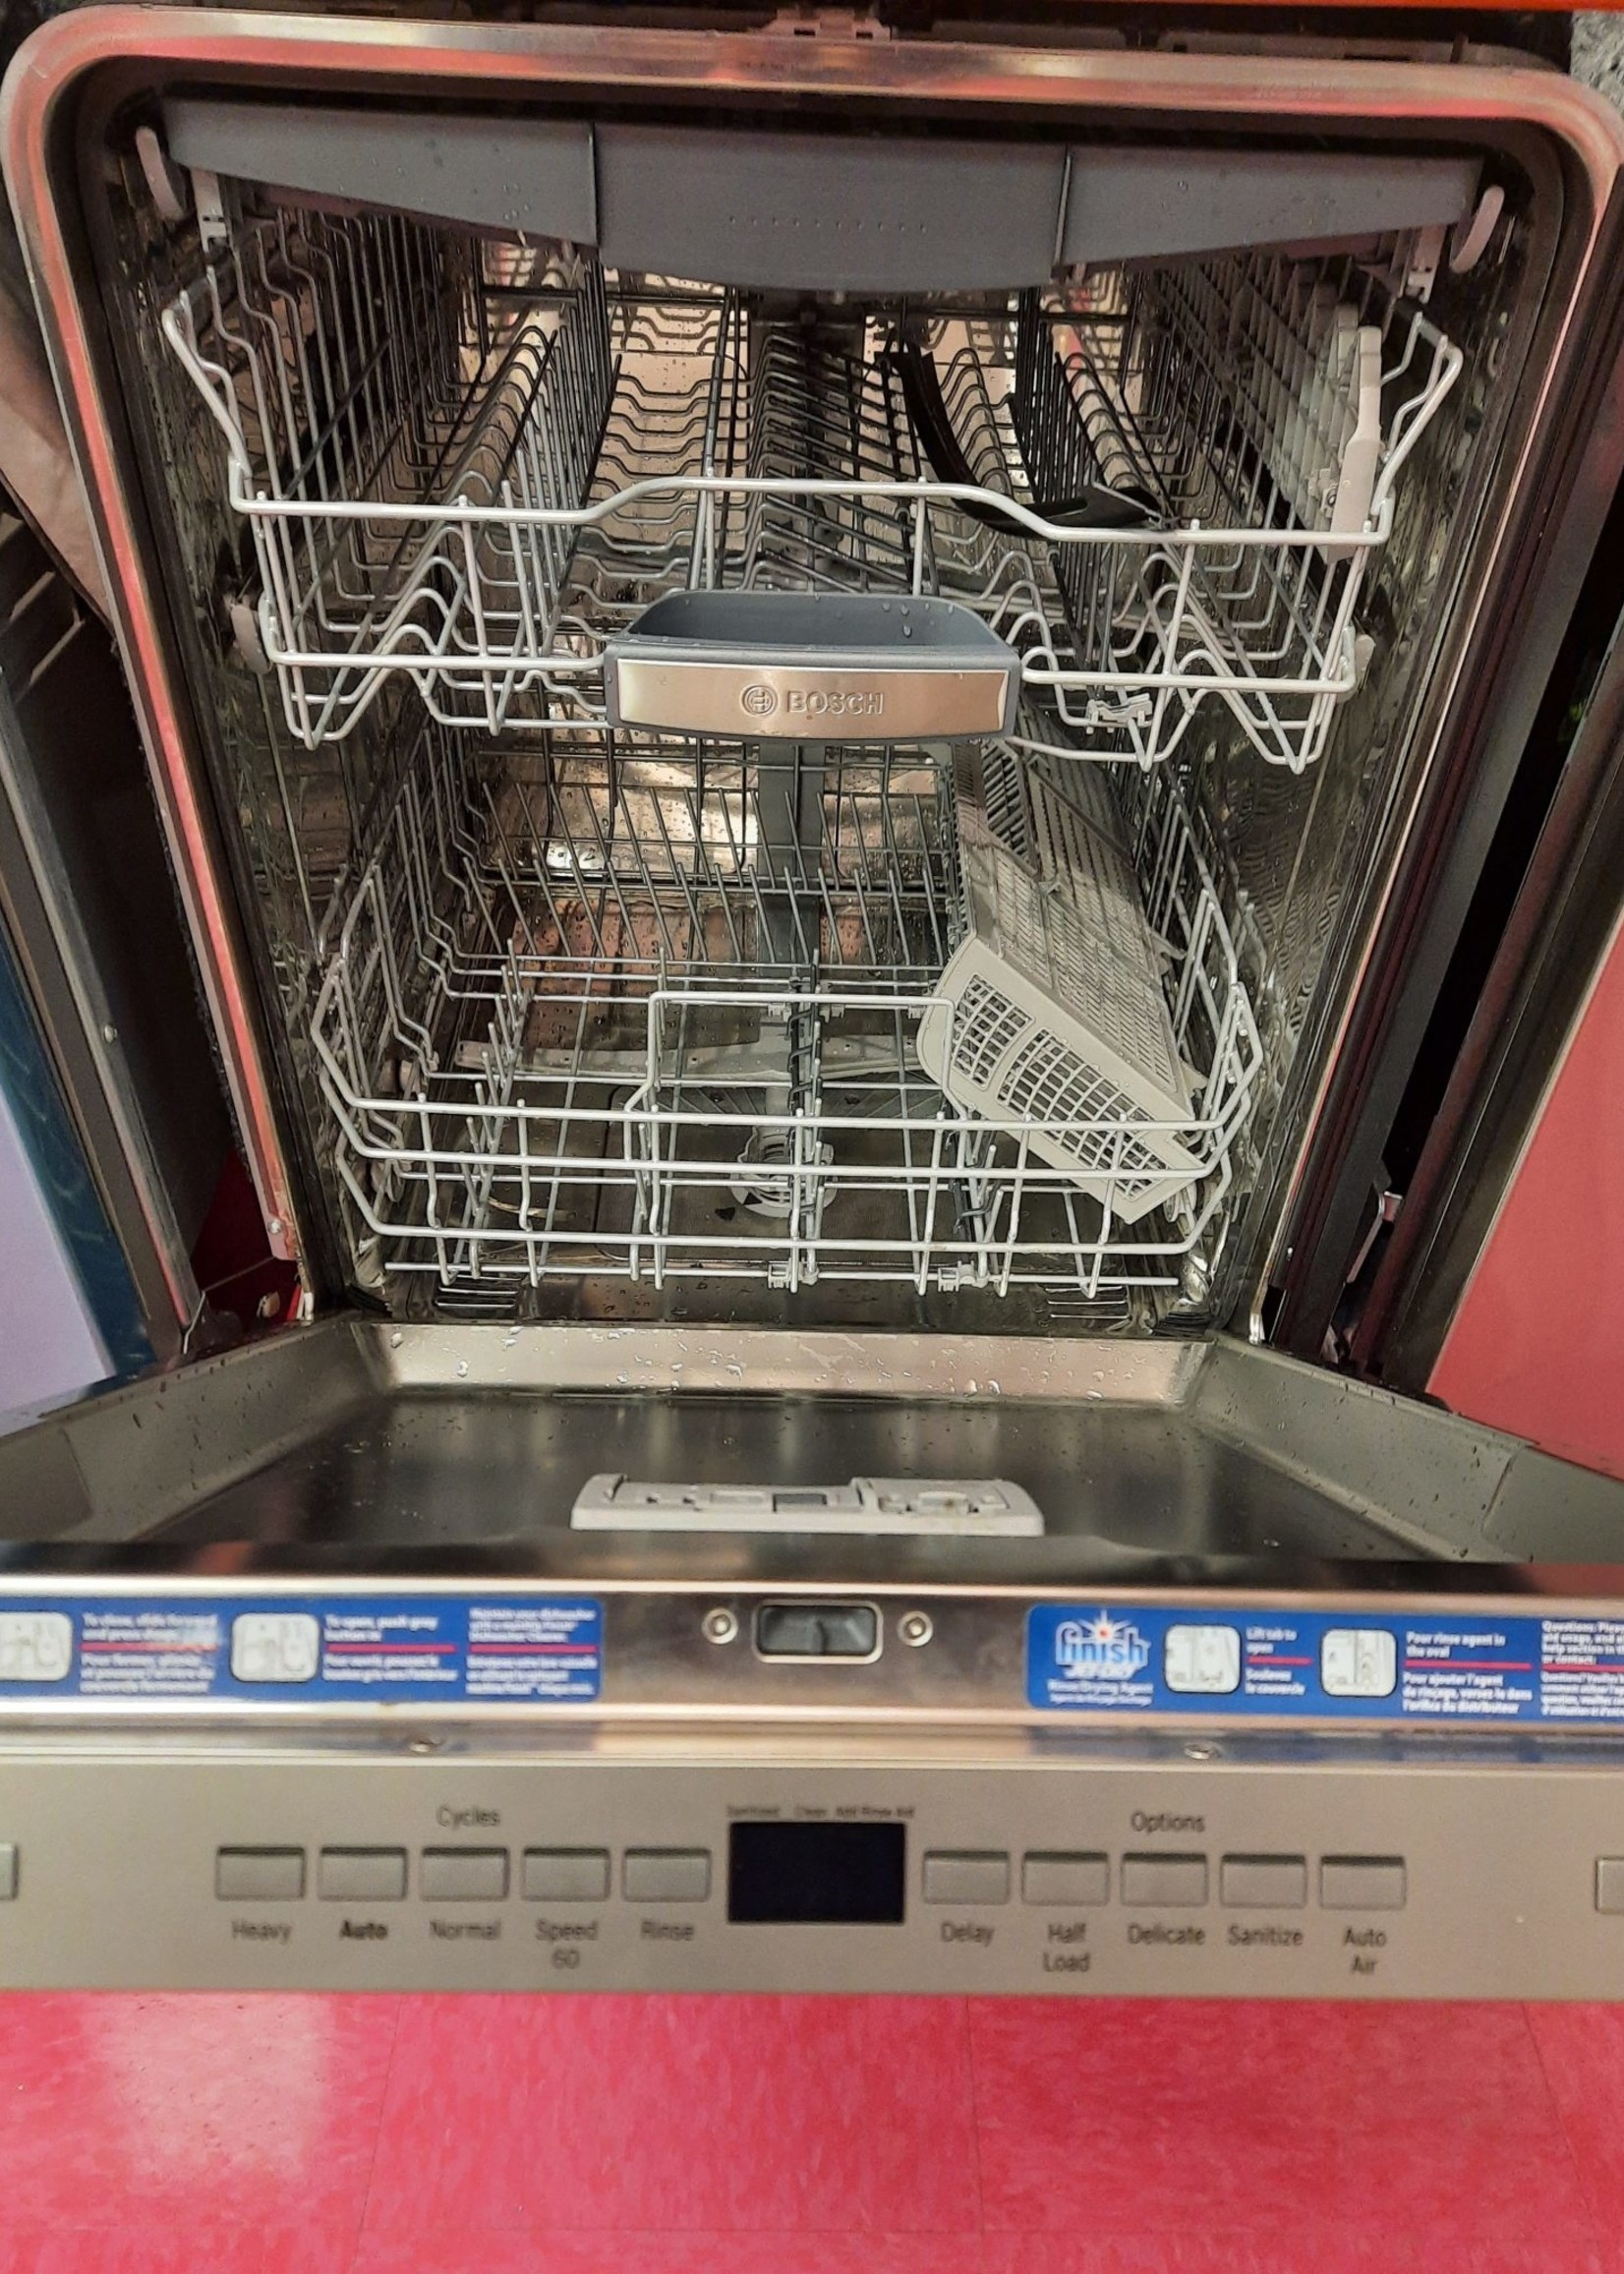 Bosch *Bosch 24" SHPM65Z55N 500 Series 24" Top Control Built-In Dishwasher with AutoAir, Stainless Steel Tub, 3rd Rack, 44 dBa - Stainless steel